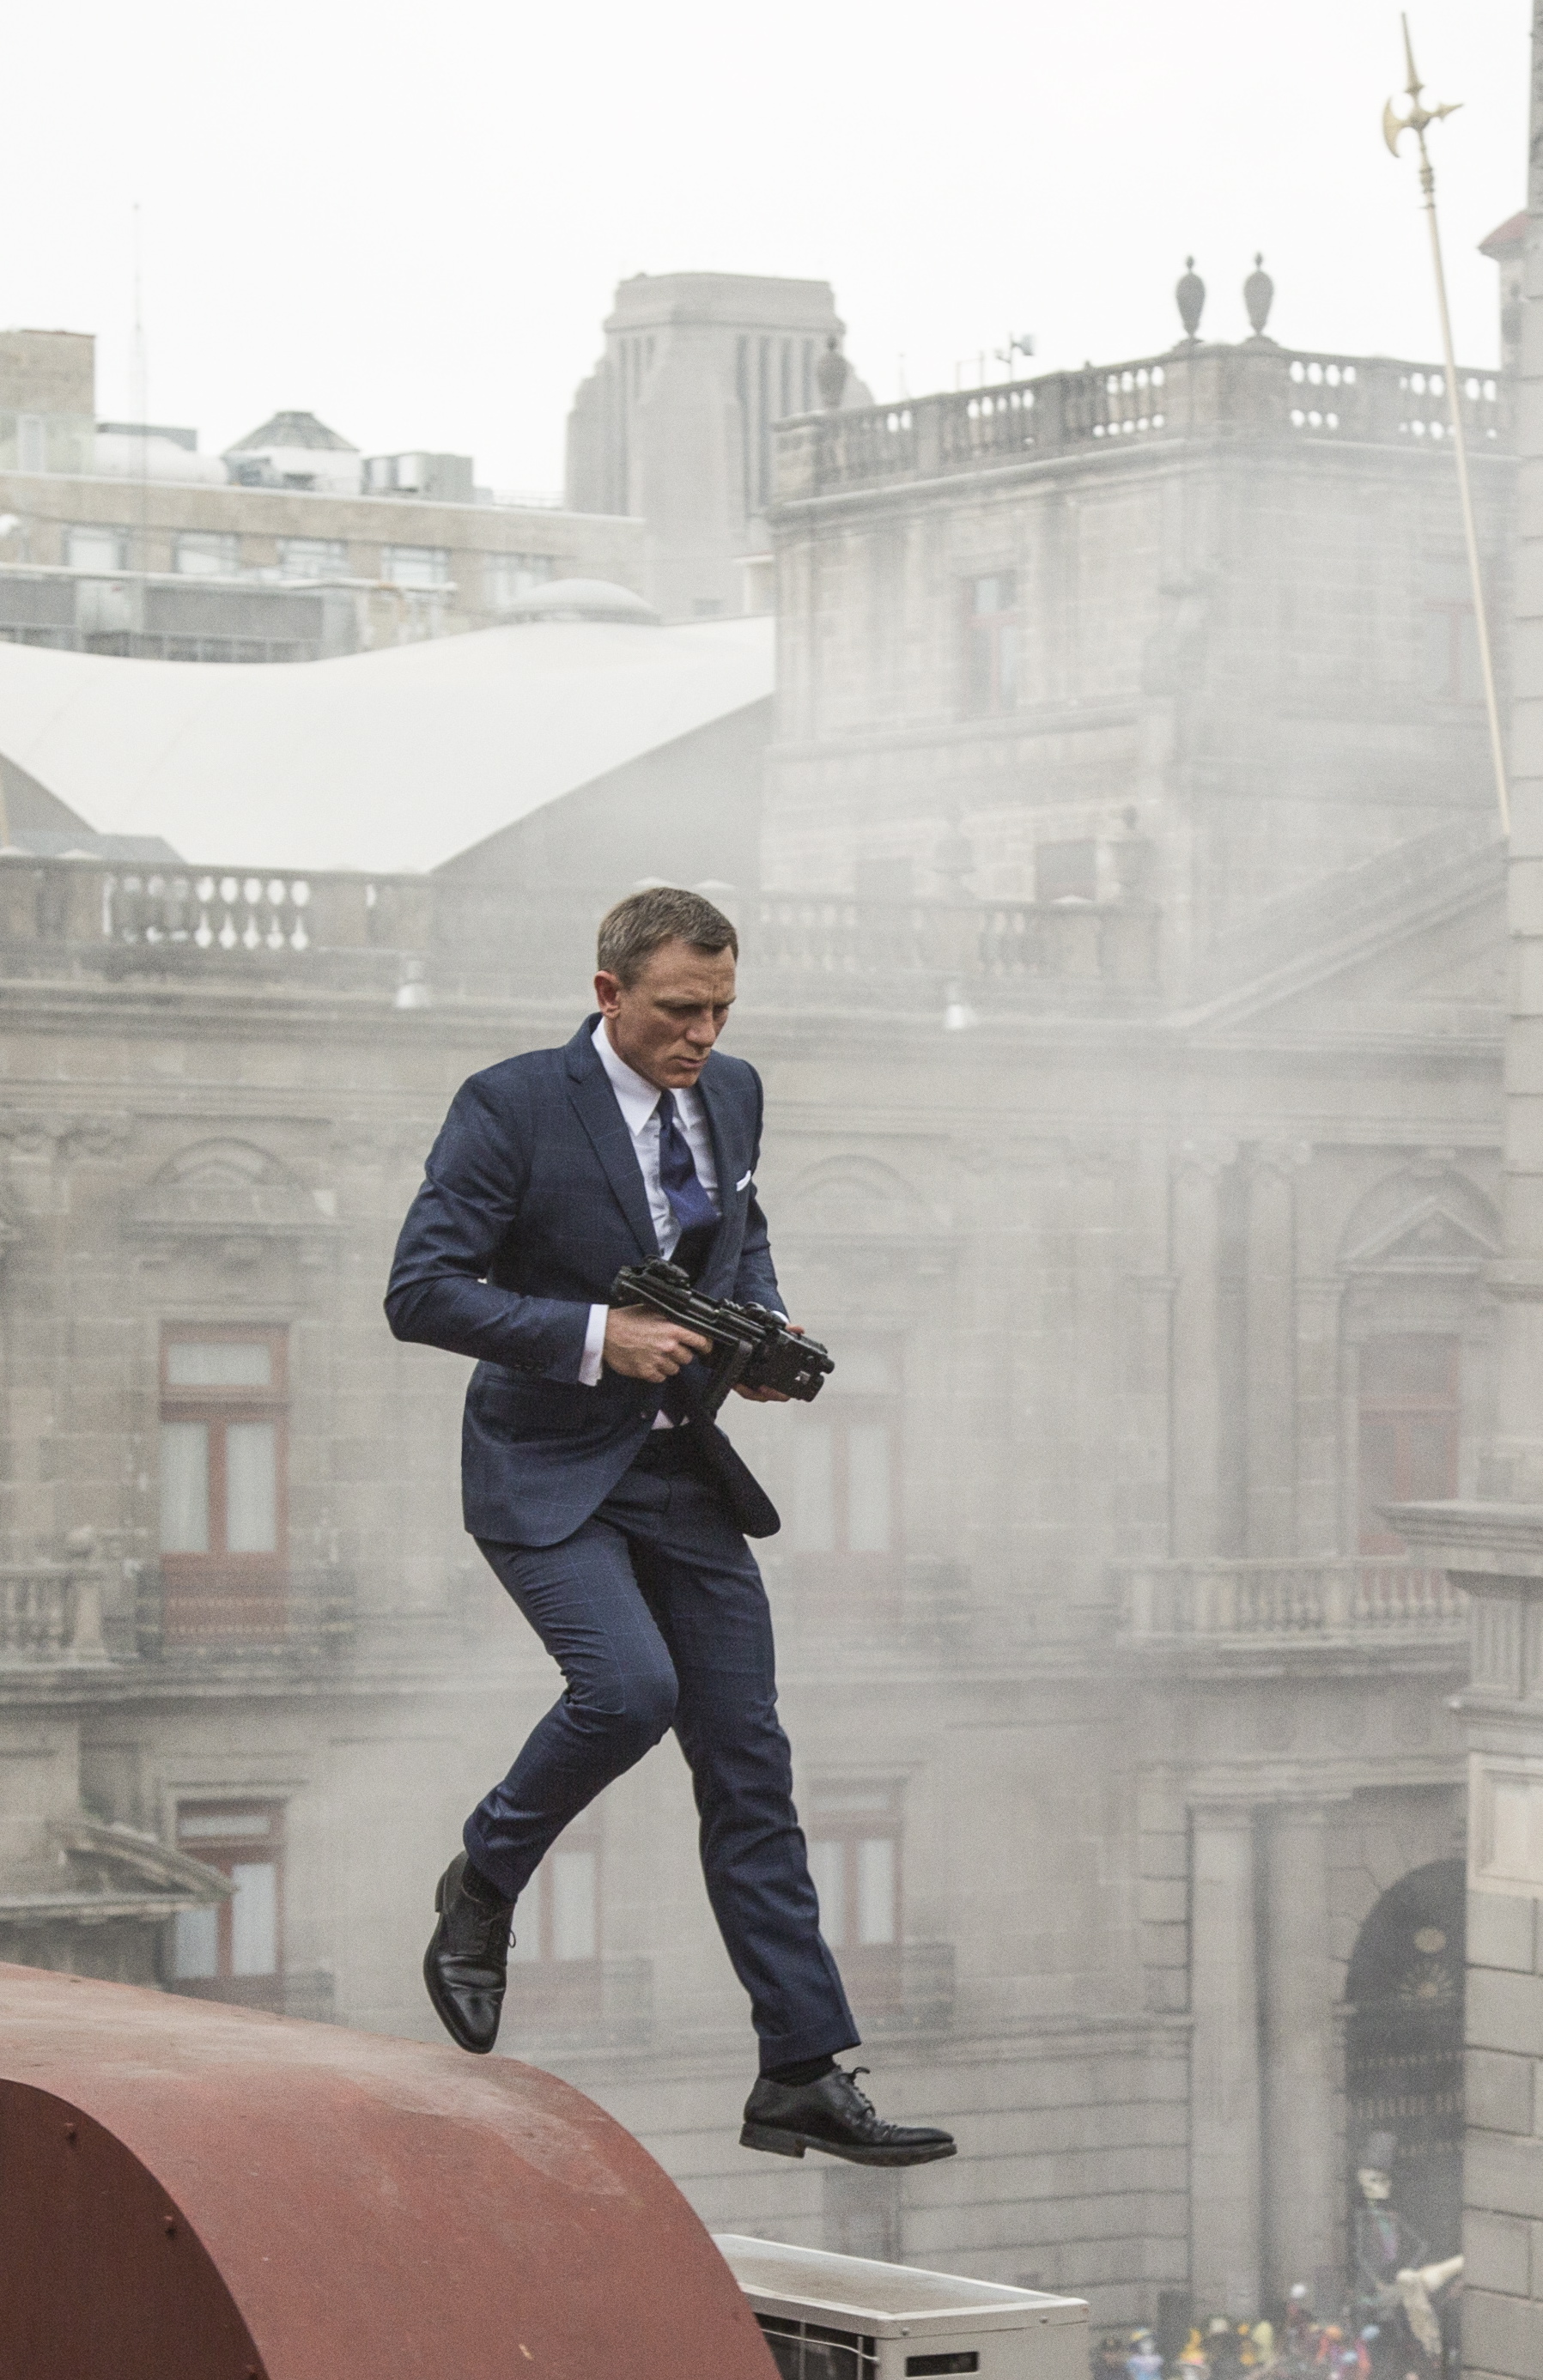 Do blonds have more fun? Daniel Craig proves that a blond Bond can go far if he just keeps walking on air.